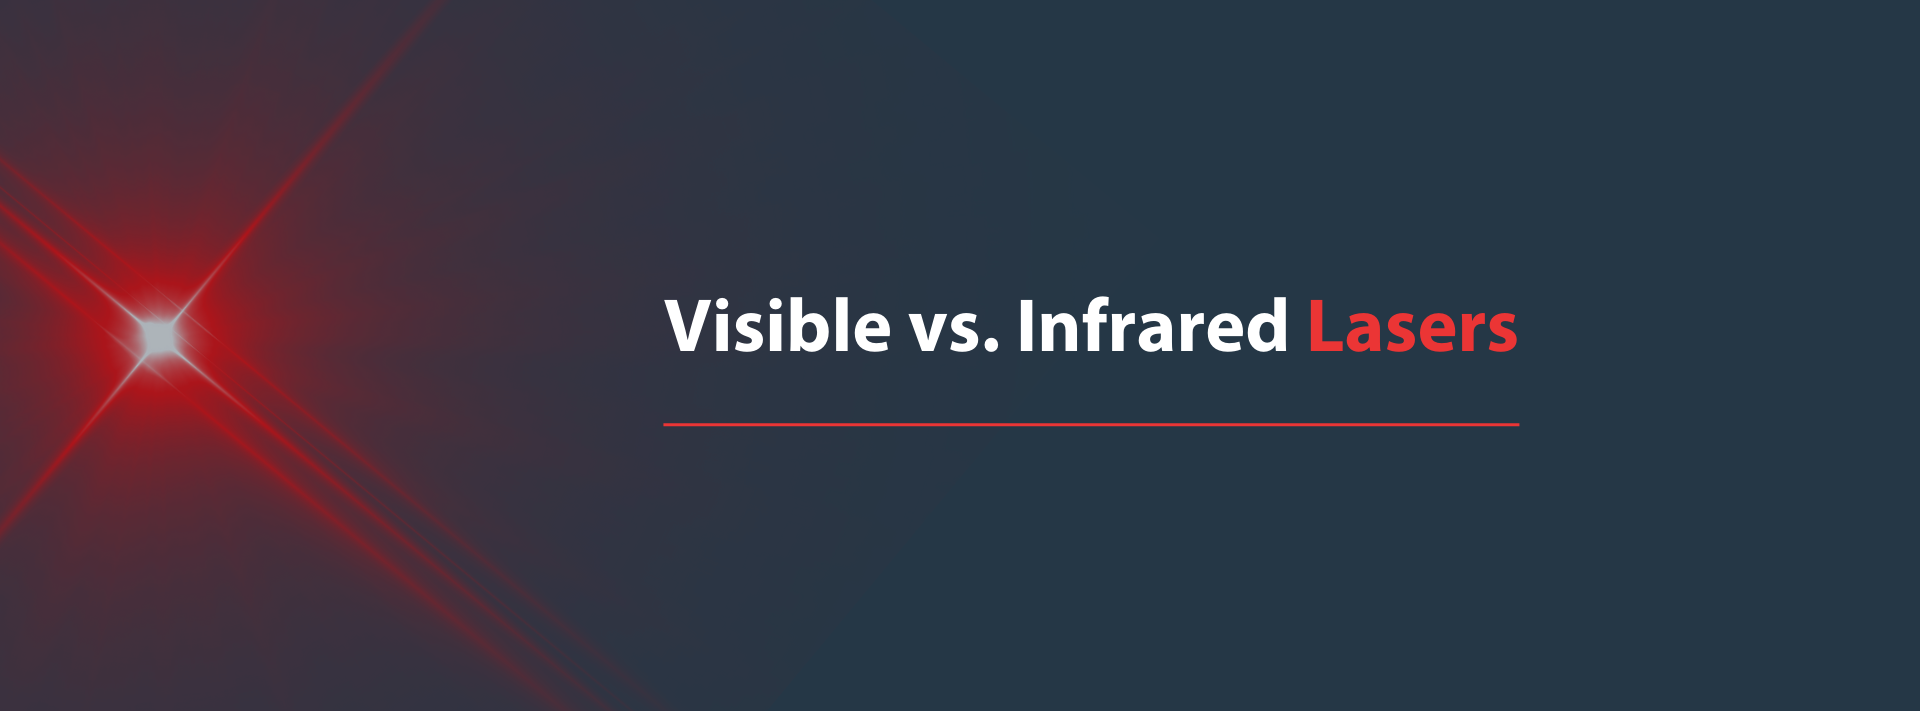 Visible vs. Infrared Lasers - Erchonia Low Laser Therapy